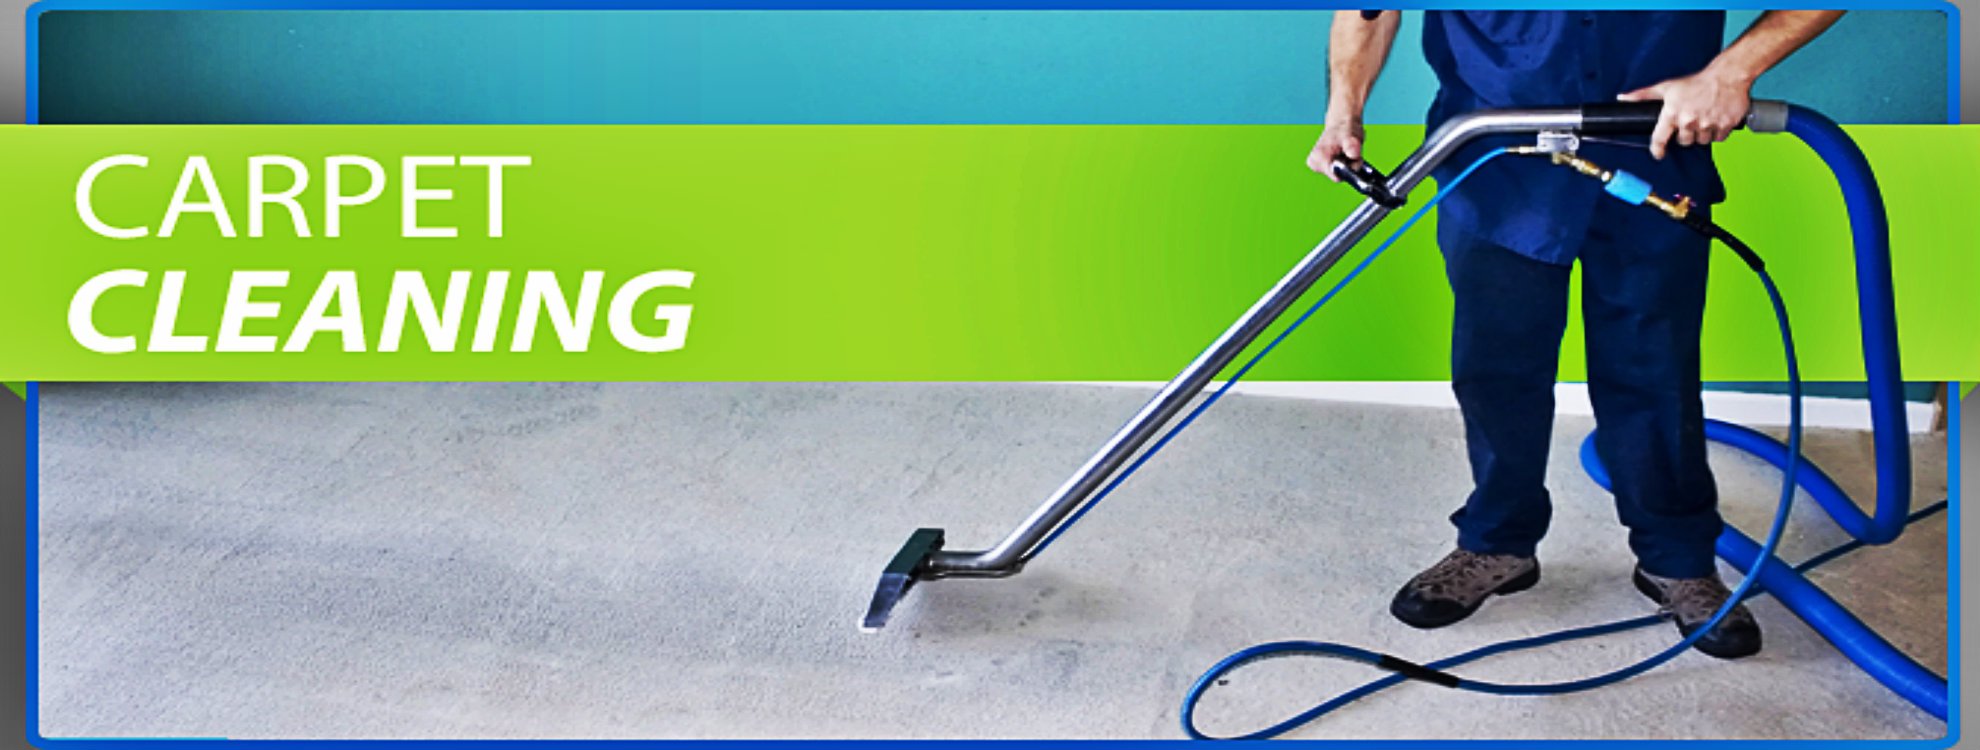 BEST CARPET CLEANING6